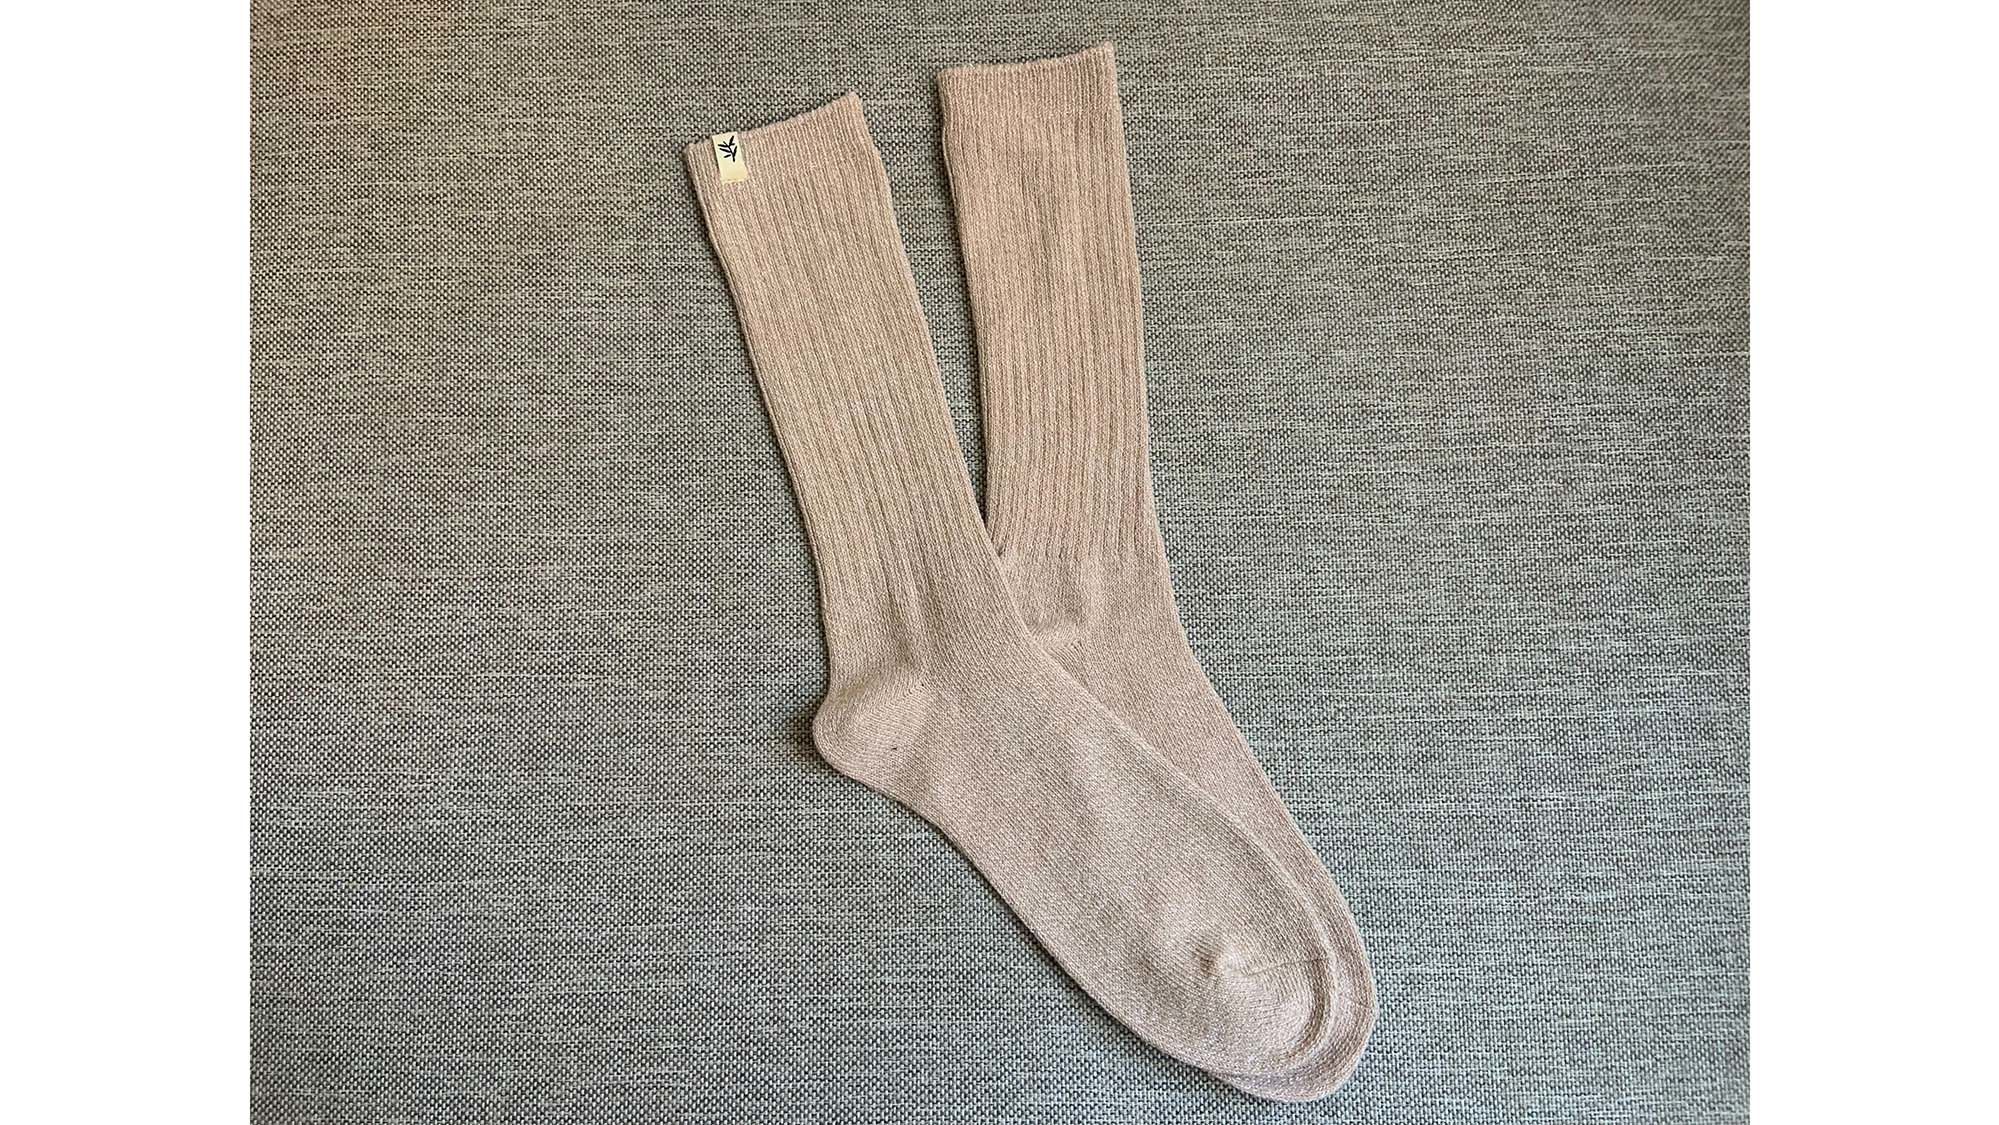 Why I've thrown away most of my Bombas socks